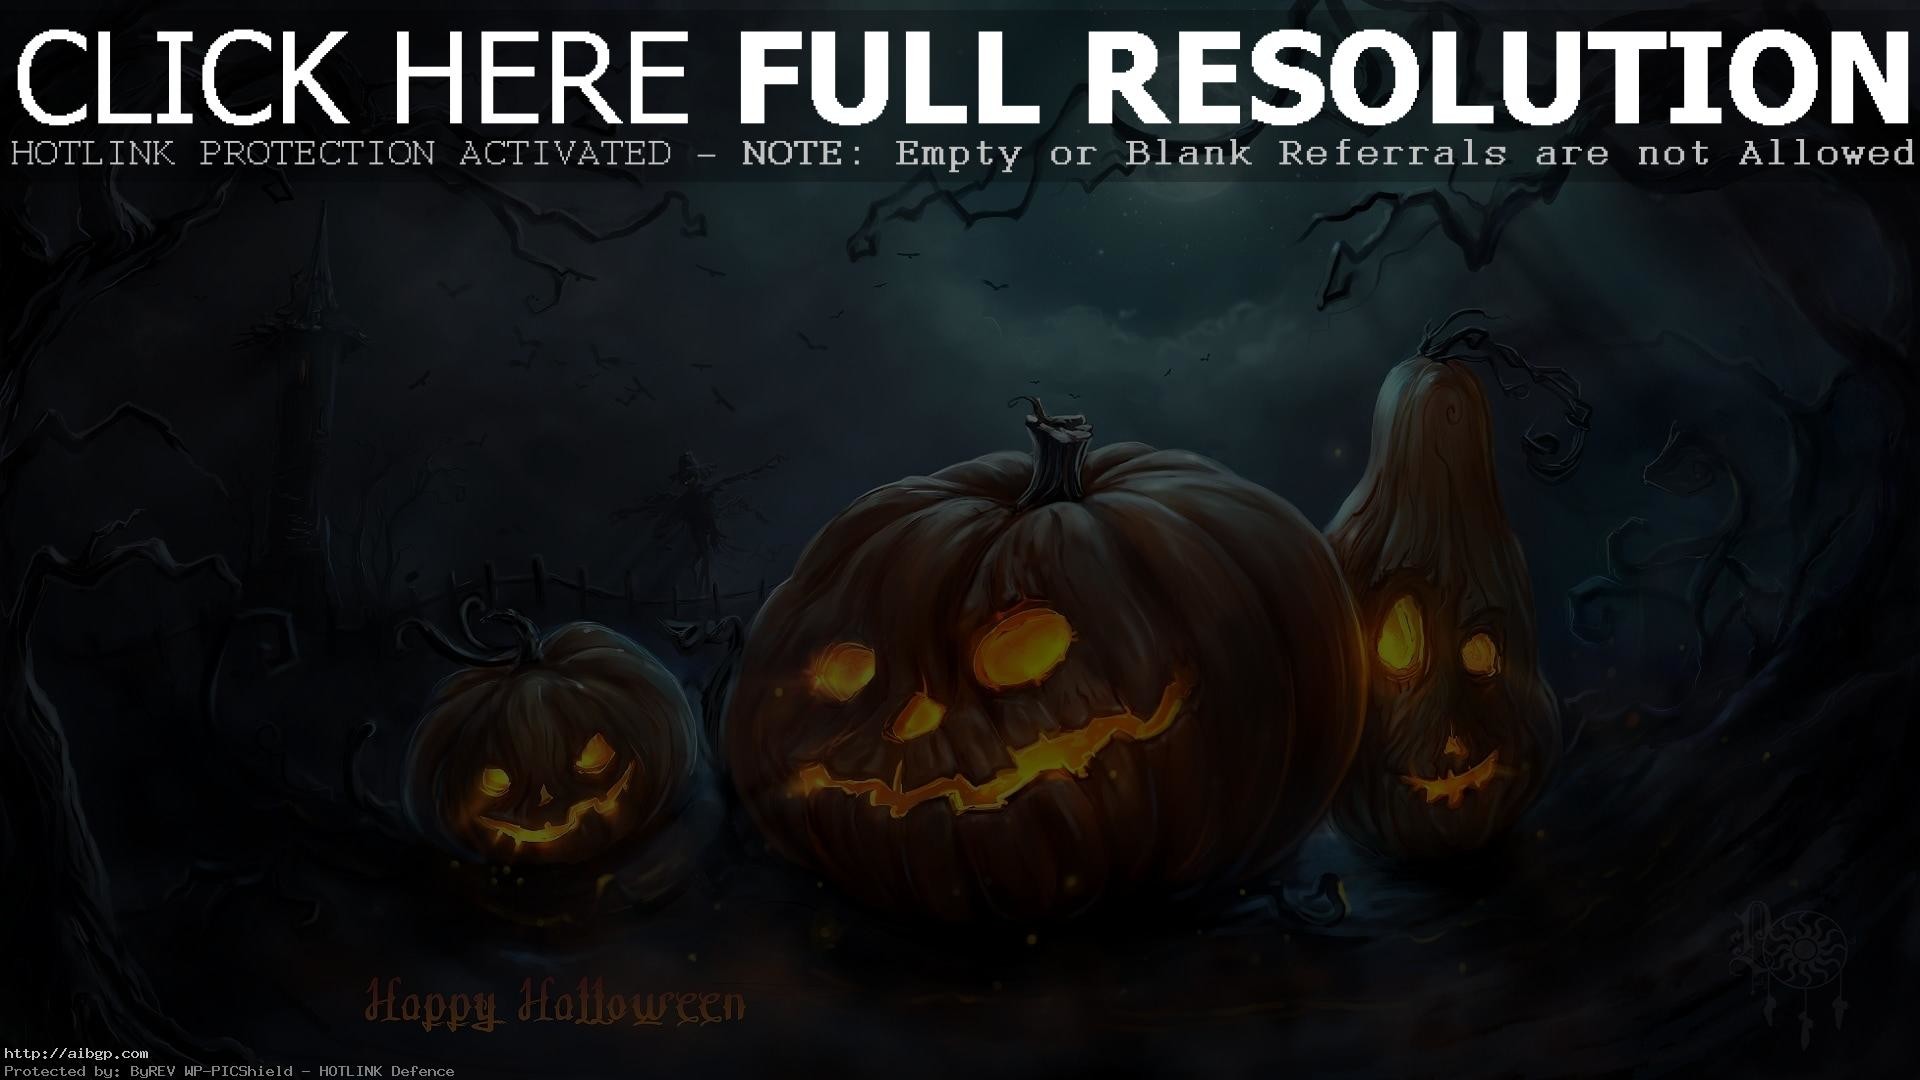 1920x1080 Cool Pumpkin Halloween Background Cool Scary Pumpkin Halloween Backgrounds